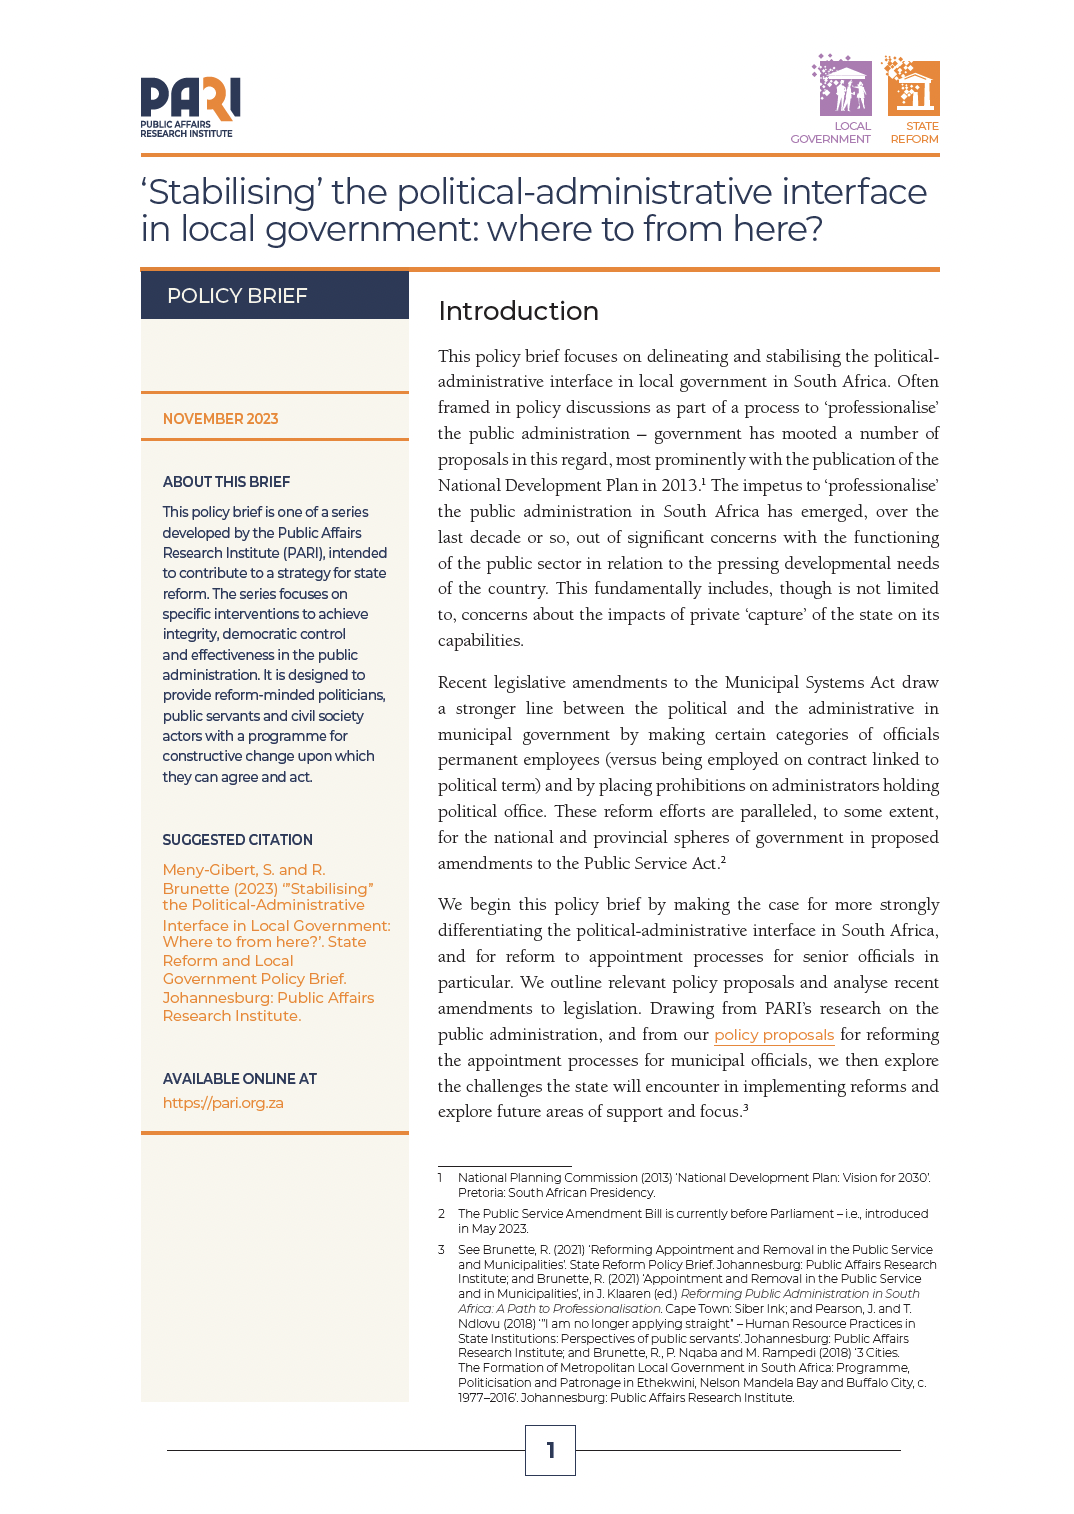 Policy brief | ‘Stabilising’ the political-administrative interface in local government: where to from here?